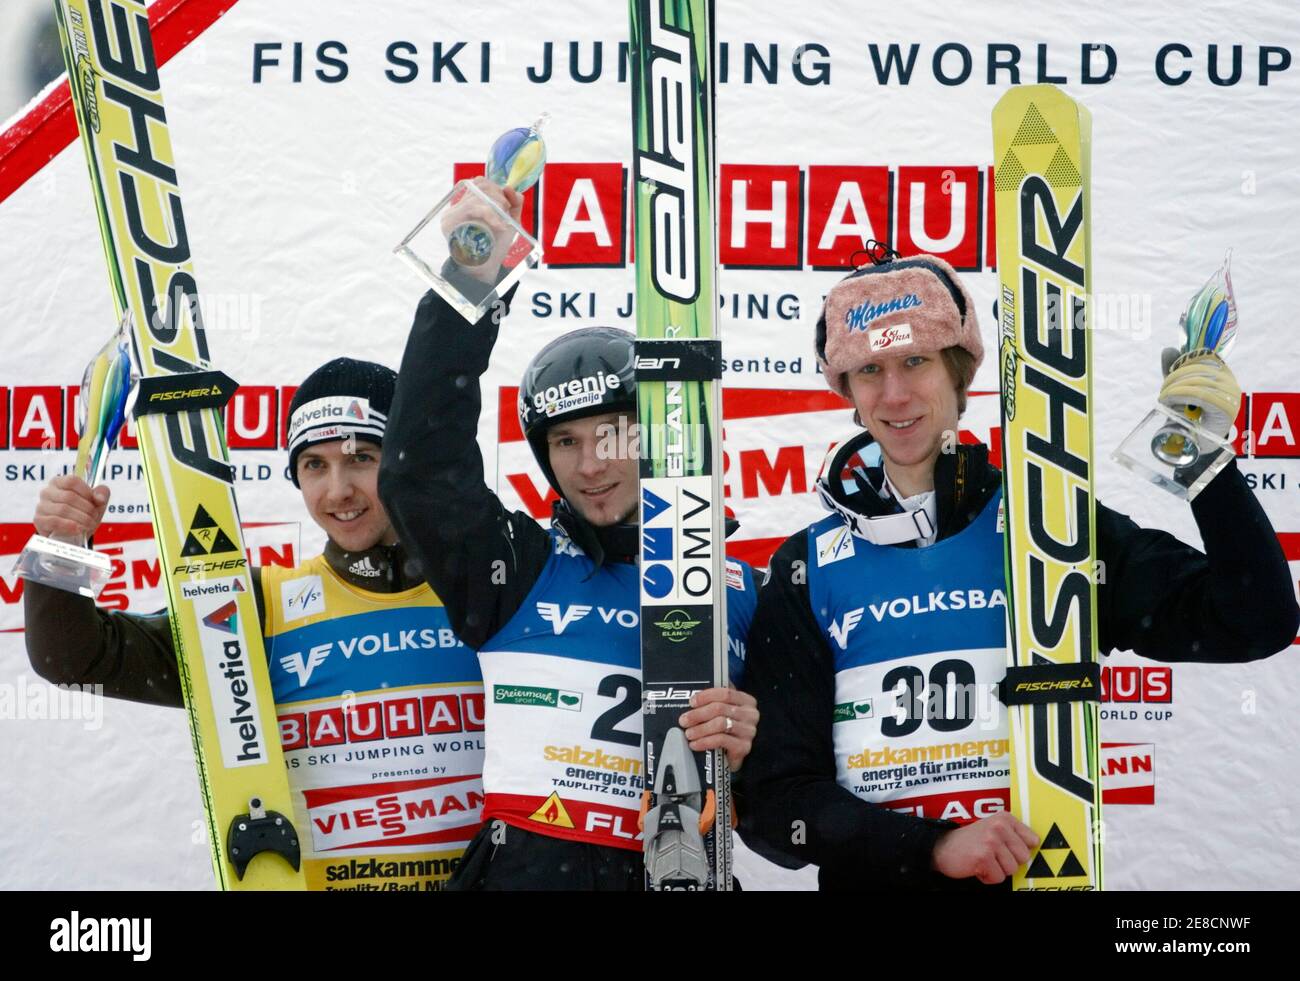 Simon Amman of Switzerland, Robert Kranjec of Slovenia and Martin Koch of  Austria (L-R) stand on the podium after a ski jumping World Cup in Bad  Mitterndorf January 9, 2010. REUTERS/Heinz-Peter Bader (